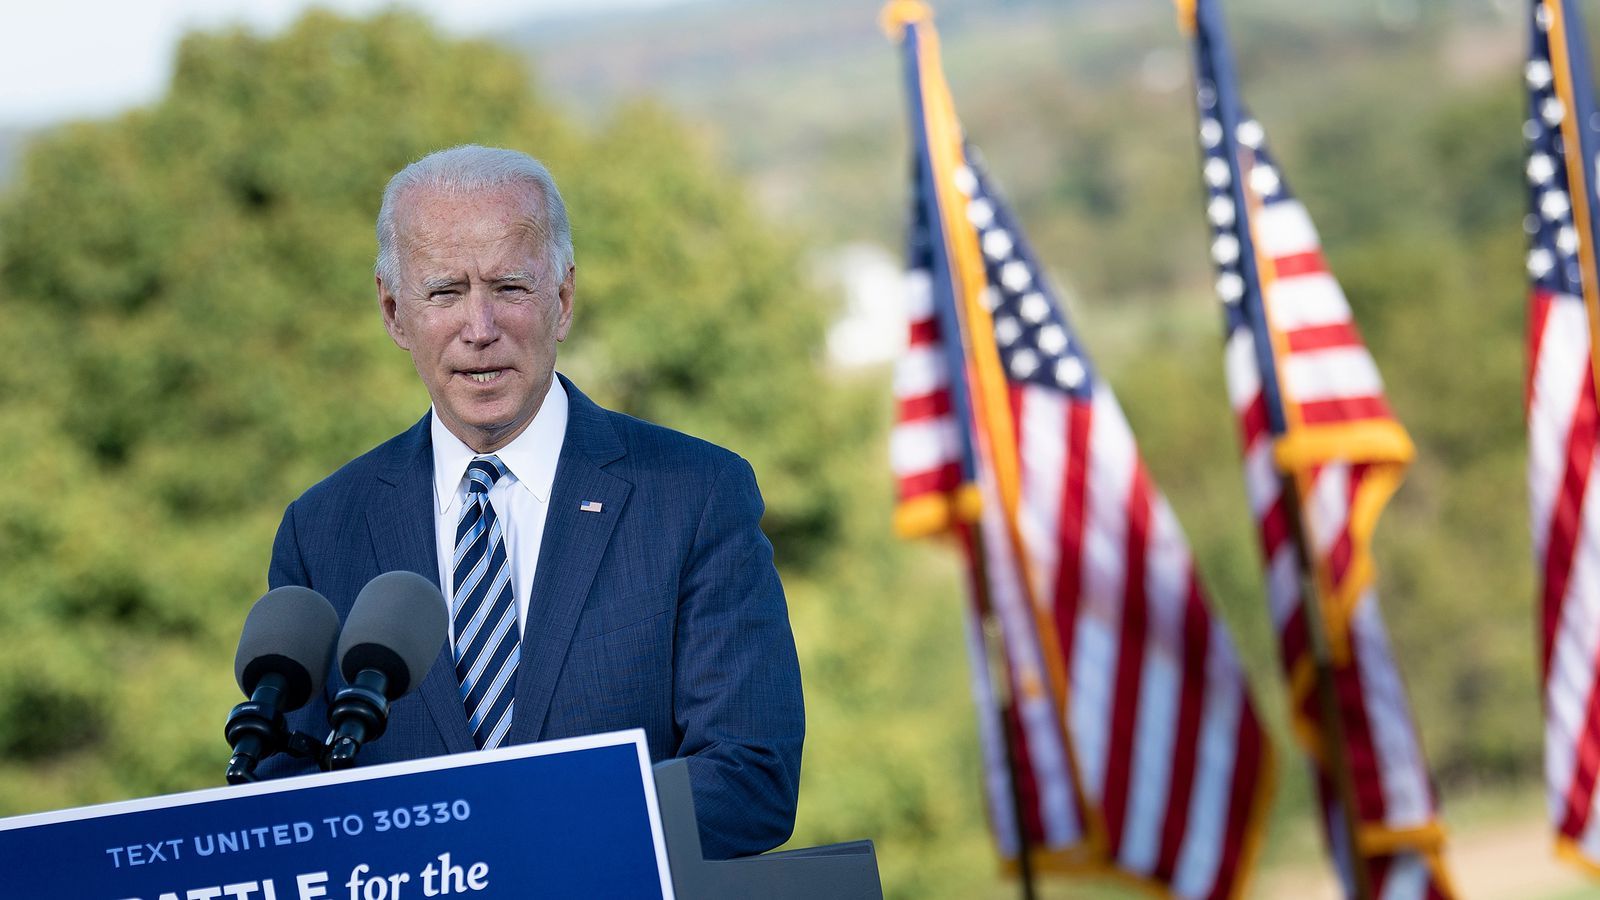 Joe Biden on the issues, a PolitiFact guide